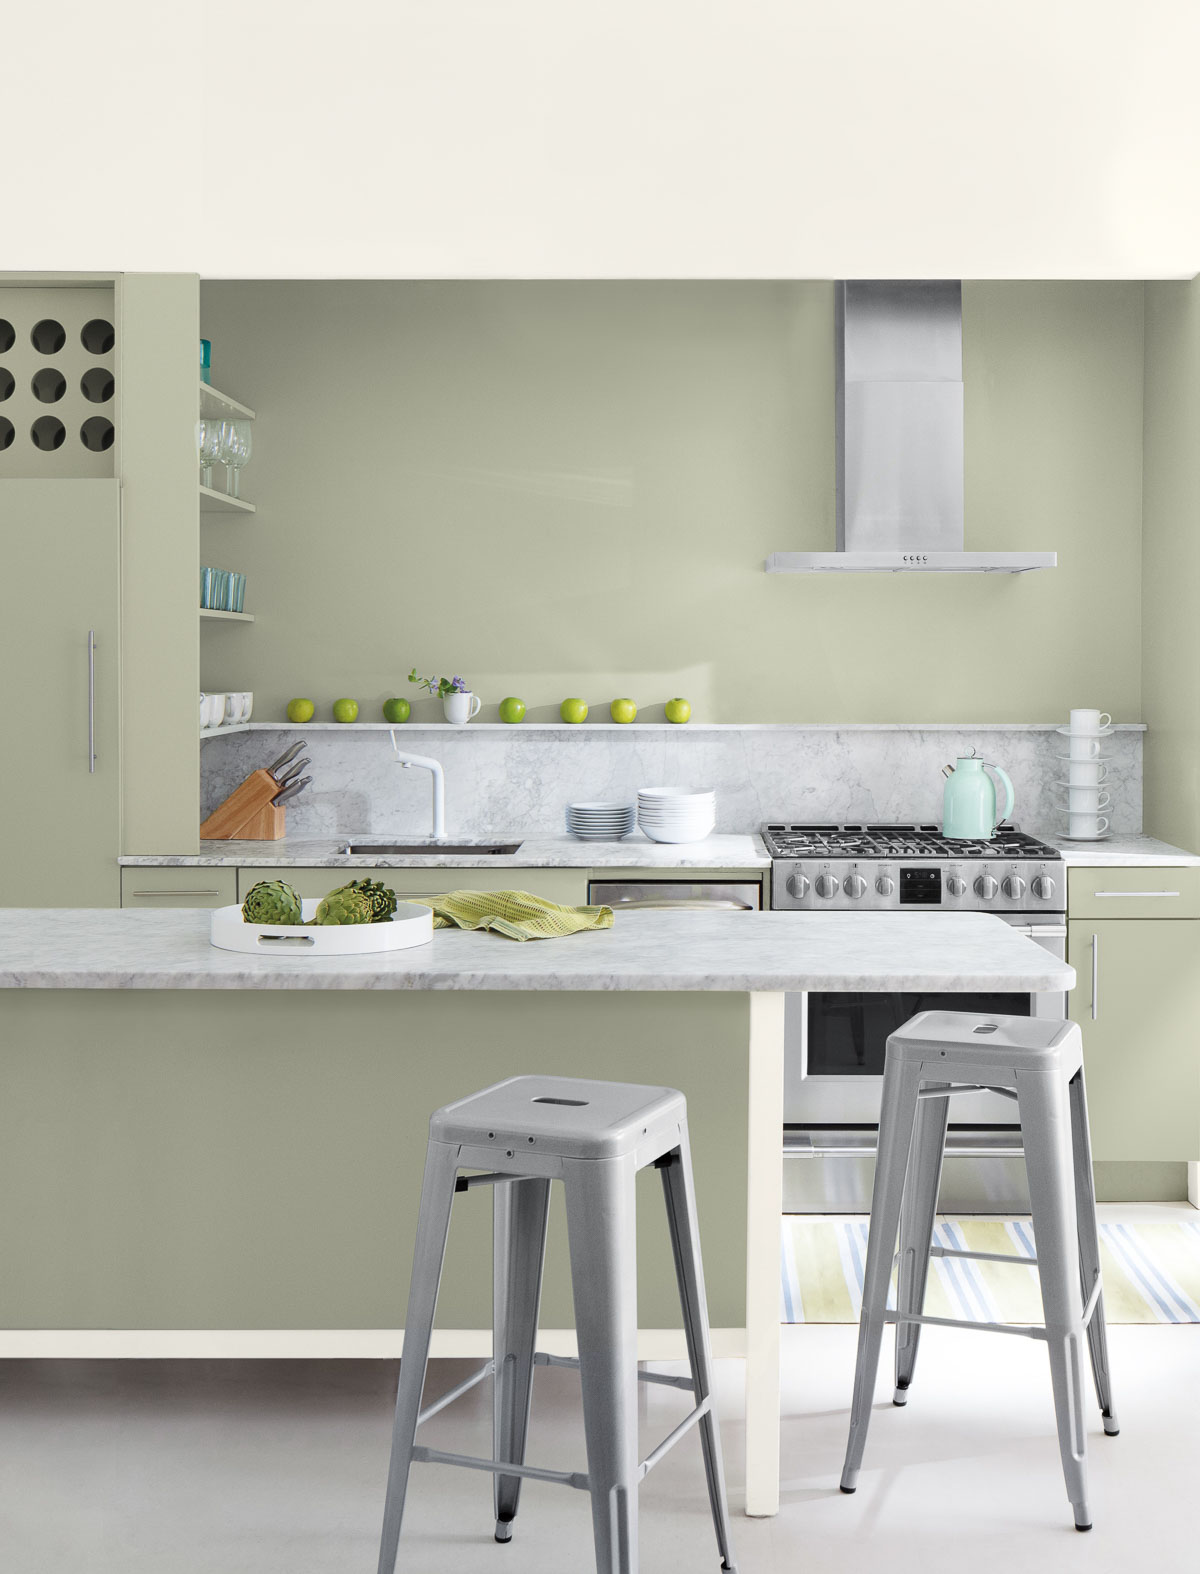 Benjamin Moore October Mist - 2022 color of the year!